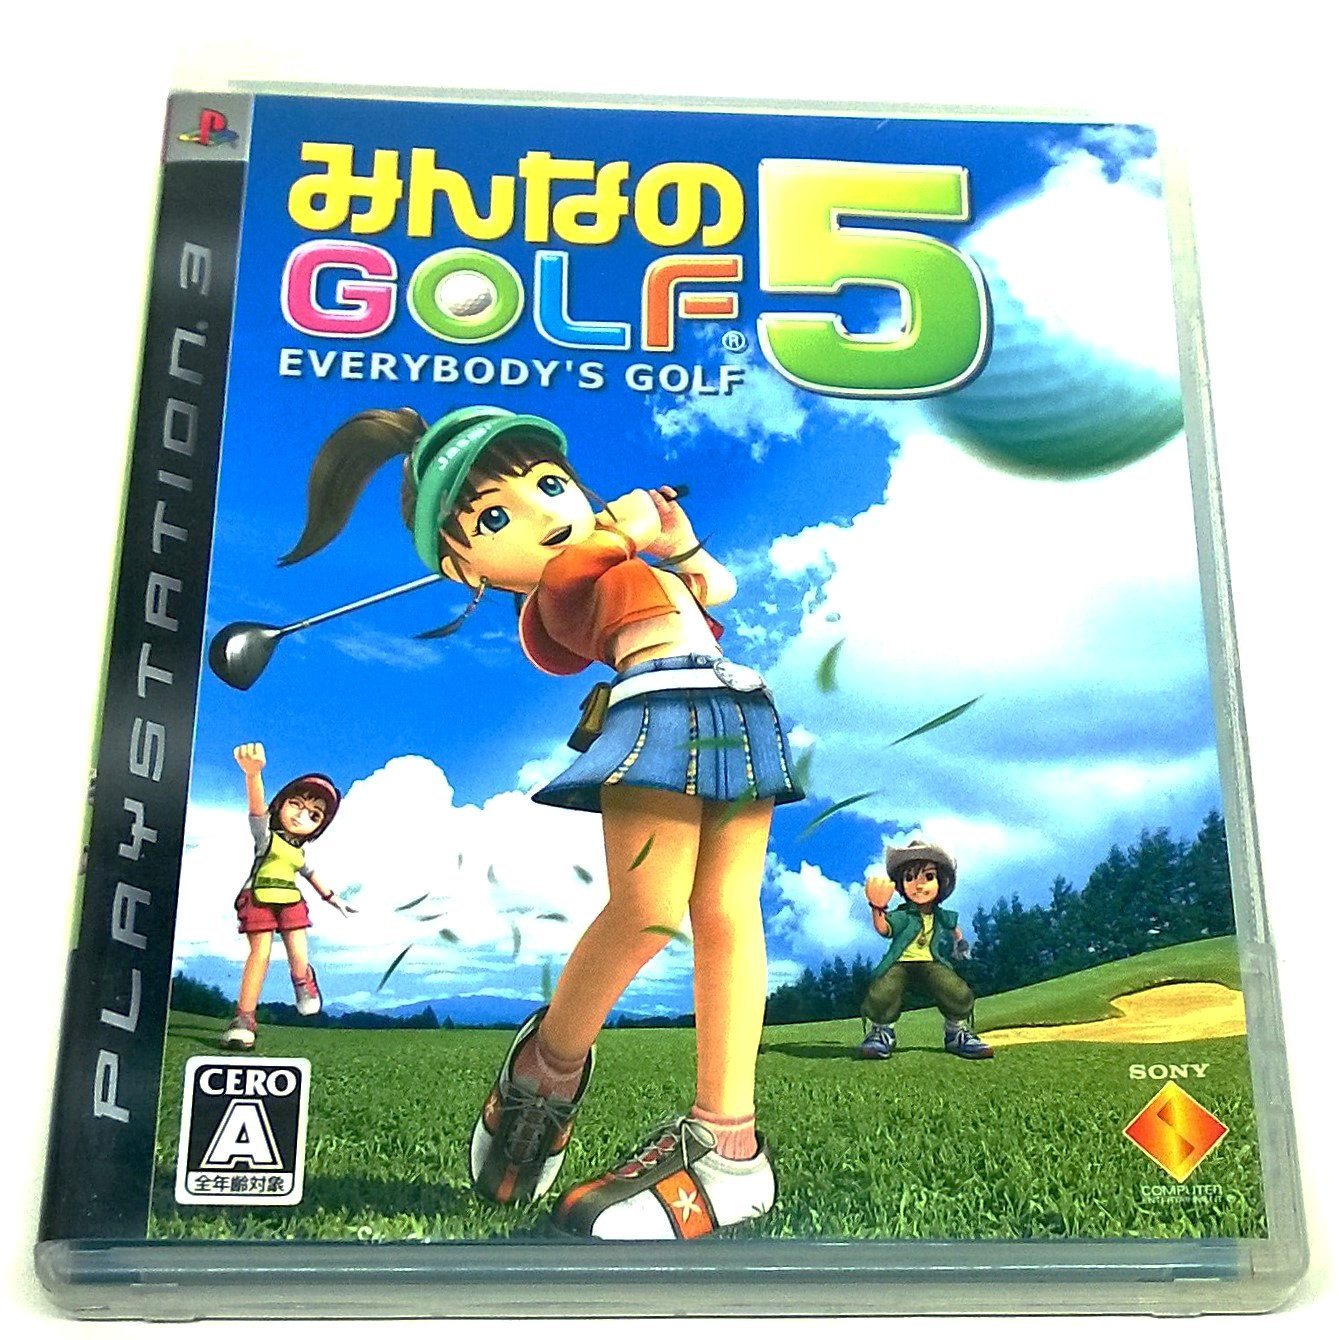 Minna no Golf 5 for PlayStation 3 (import) - Front of case